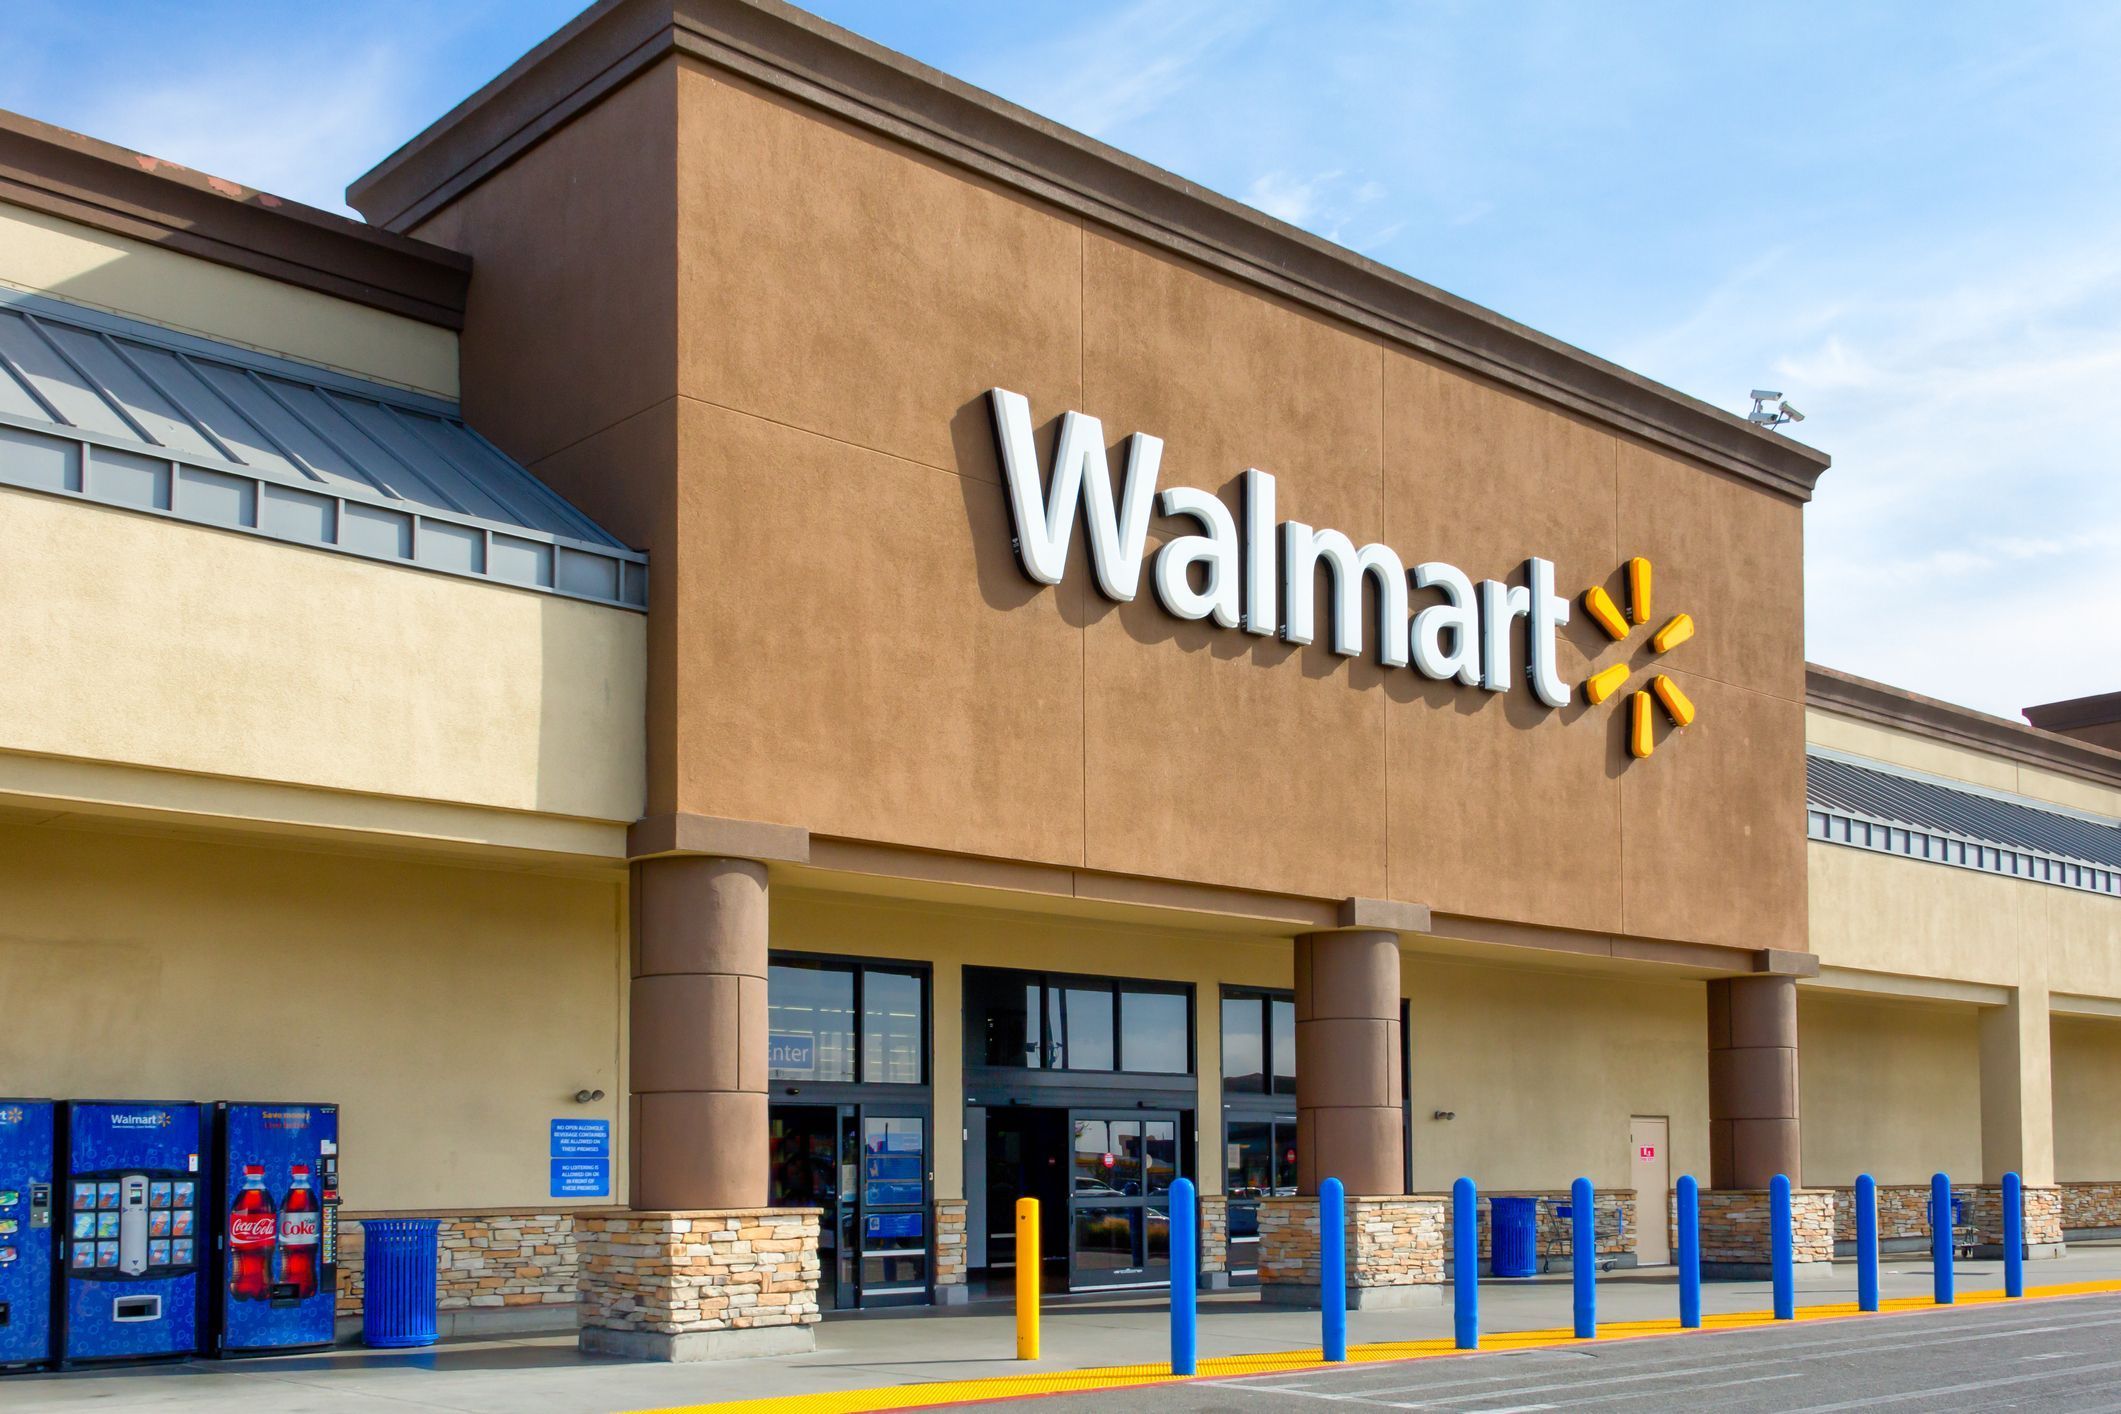 How Much Money Does Walmart Make A Second, Minute & Day?